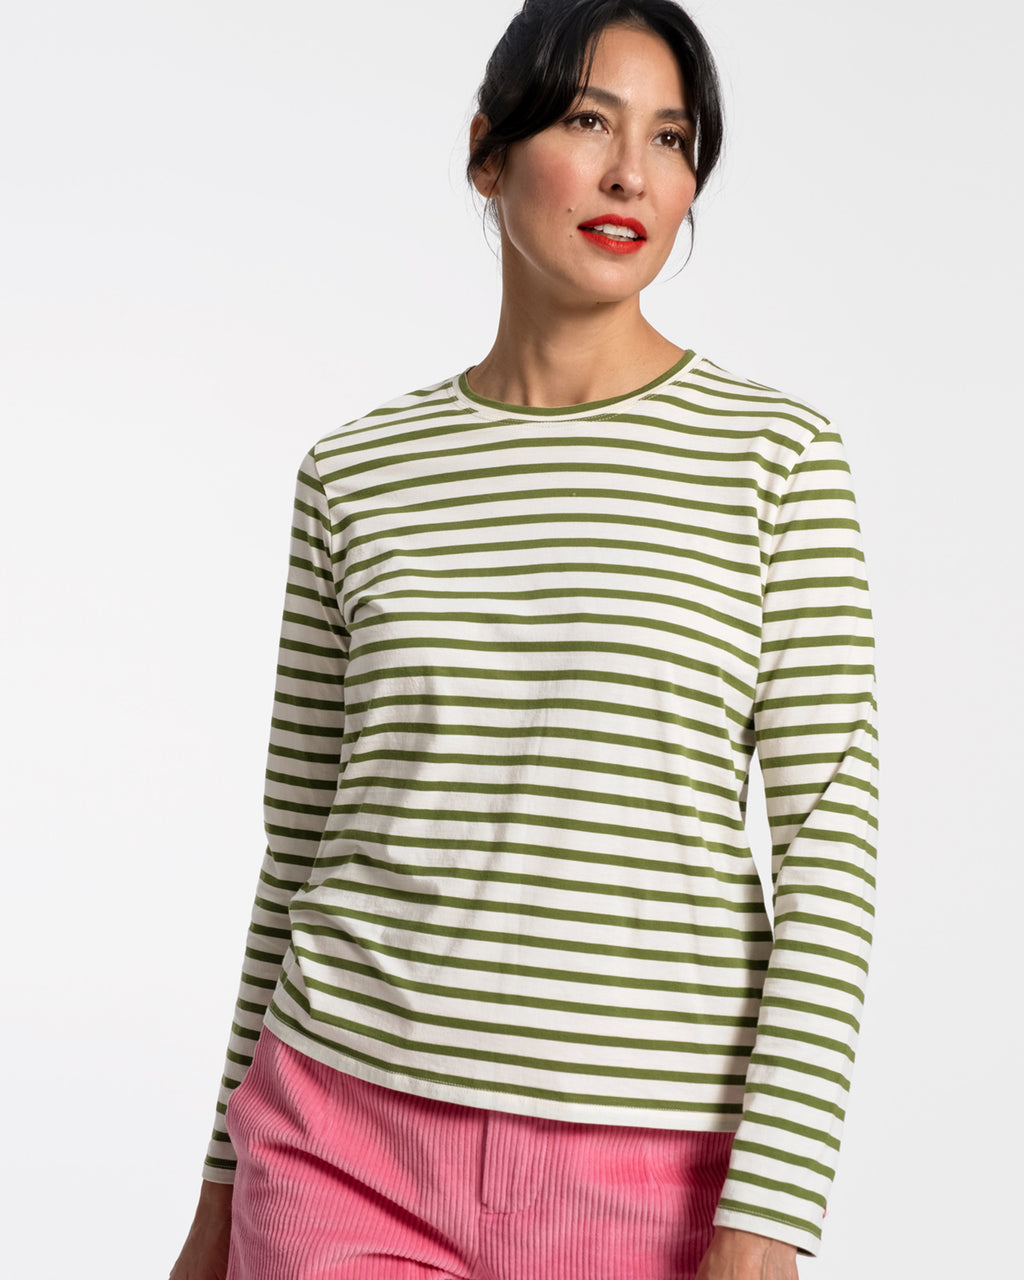 Long | Sleeve Frances Valentine Oyster Striped Green Shirt